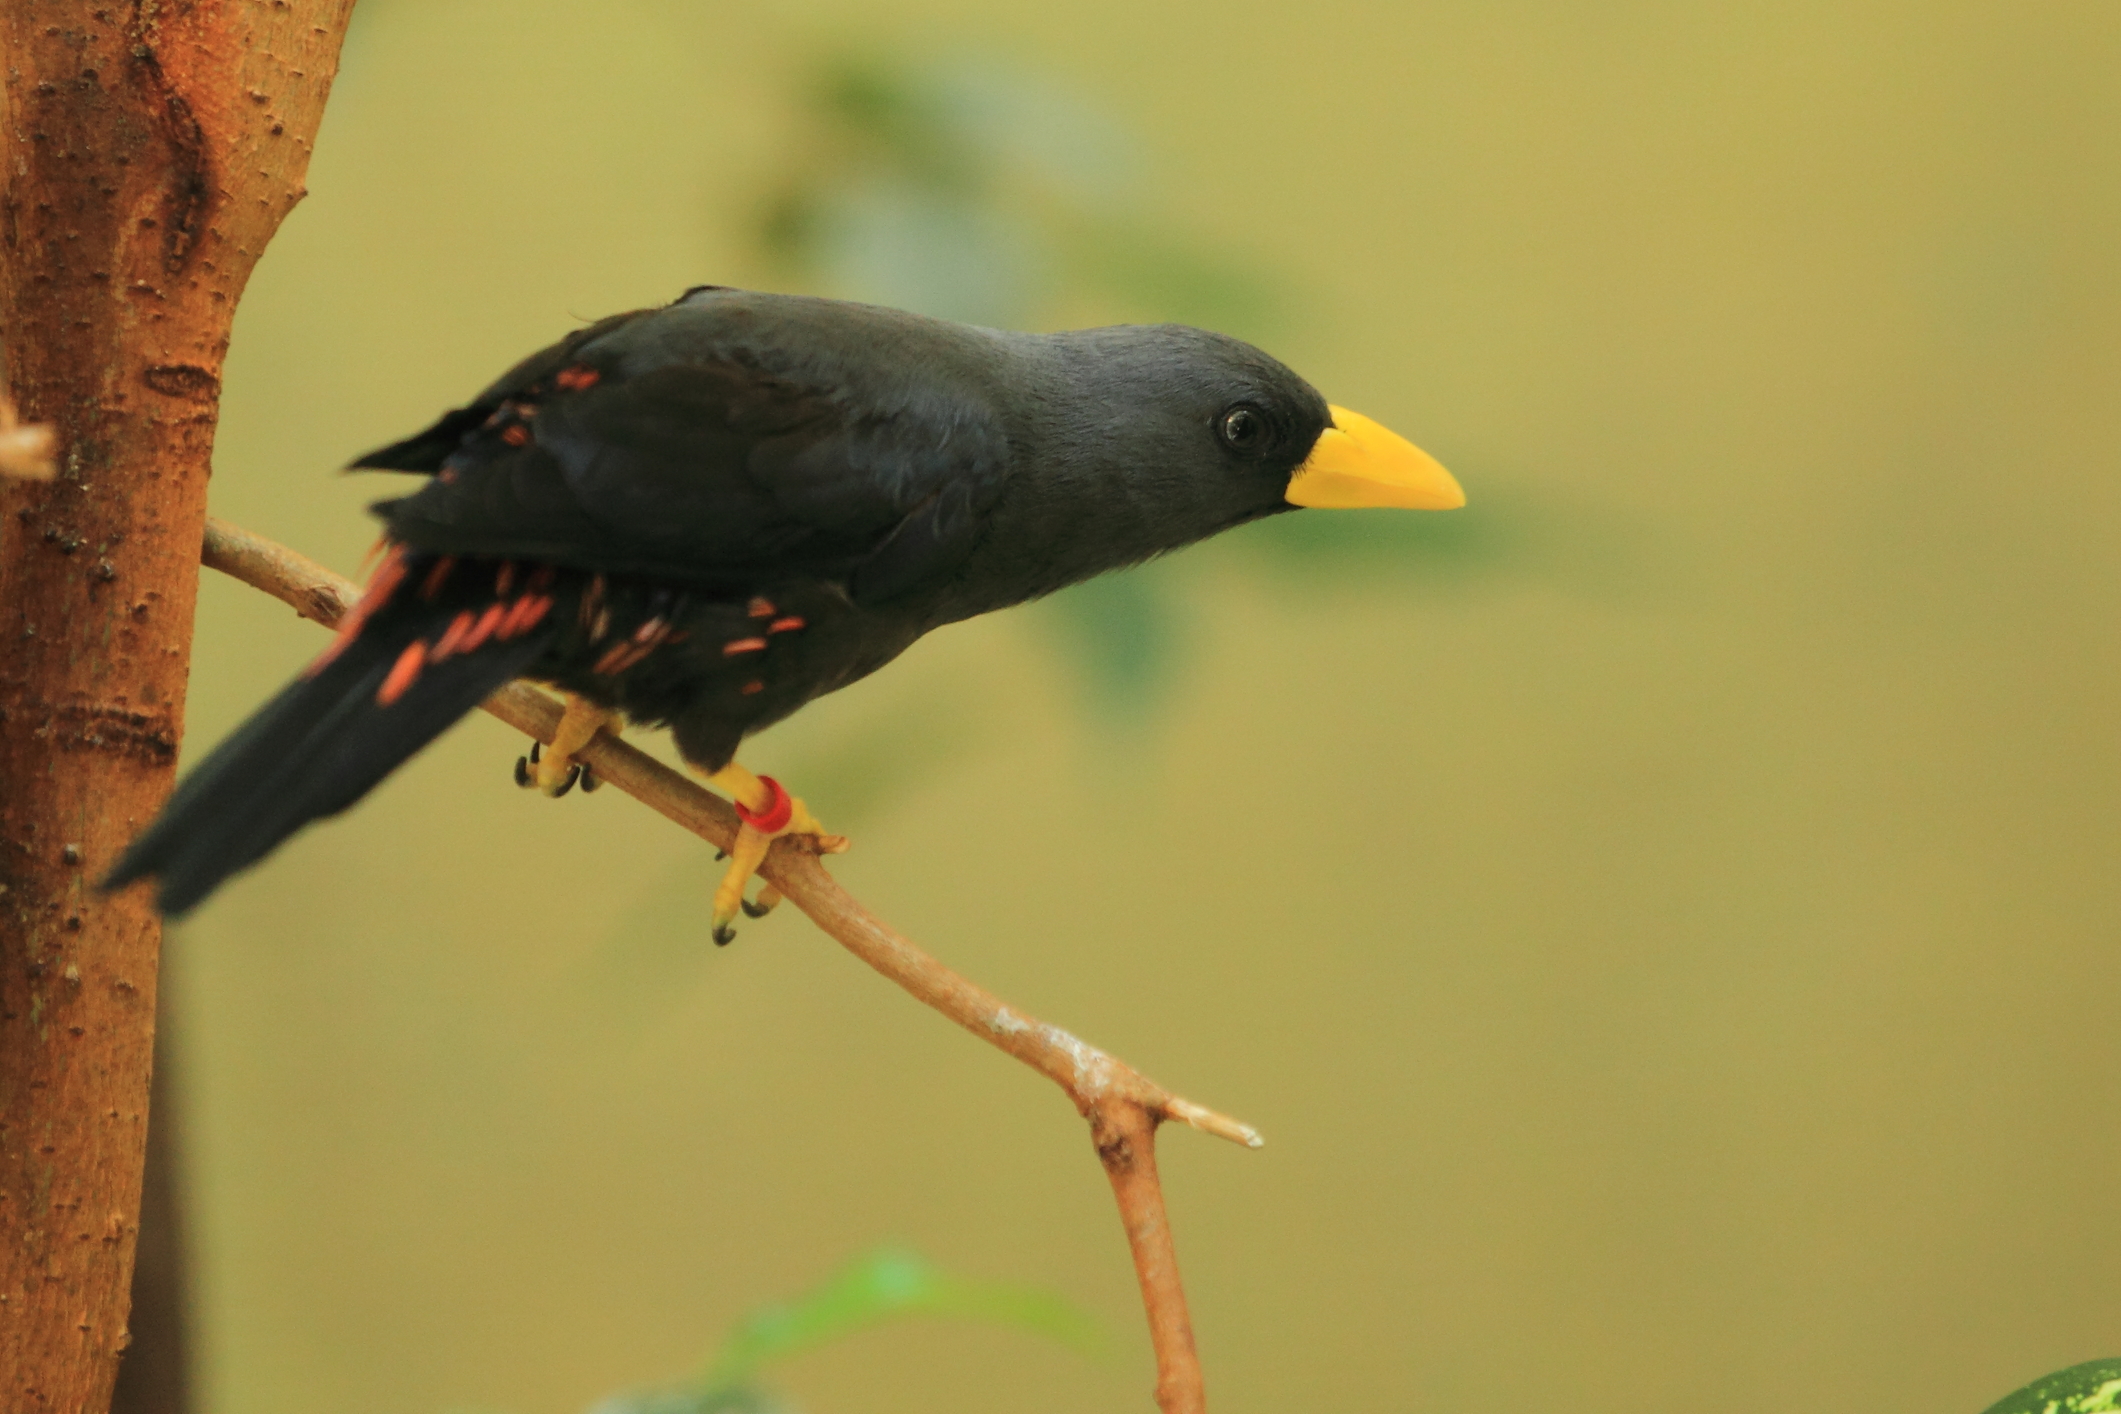 A Grosbeak Starling perched on a branch